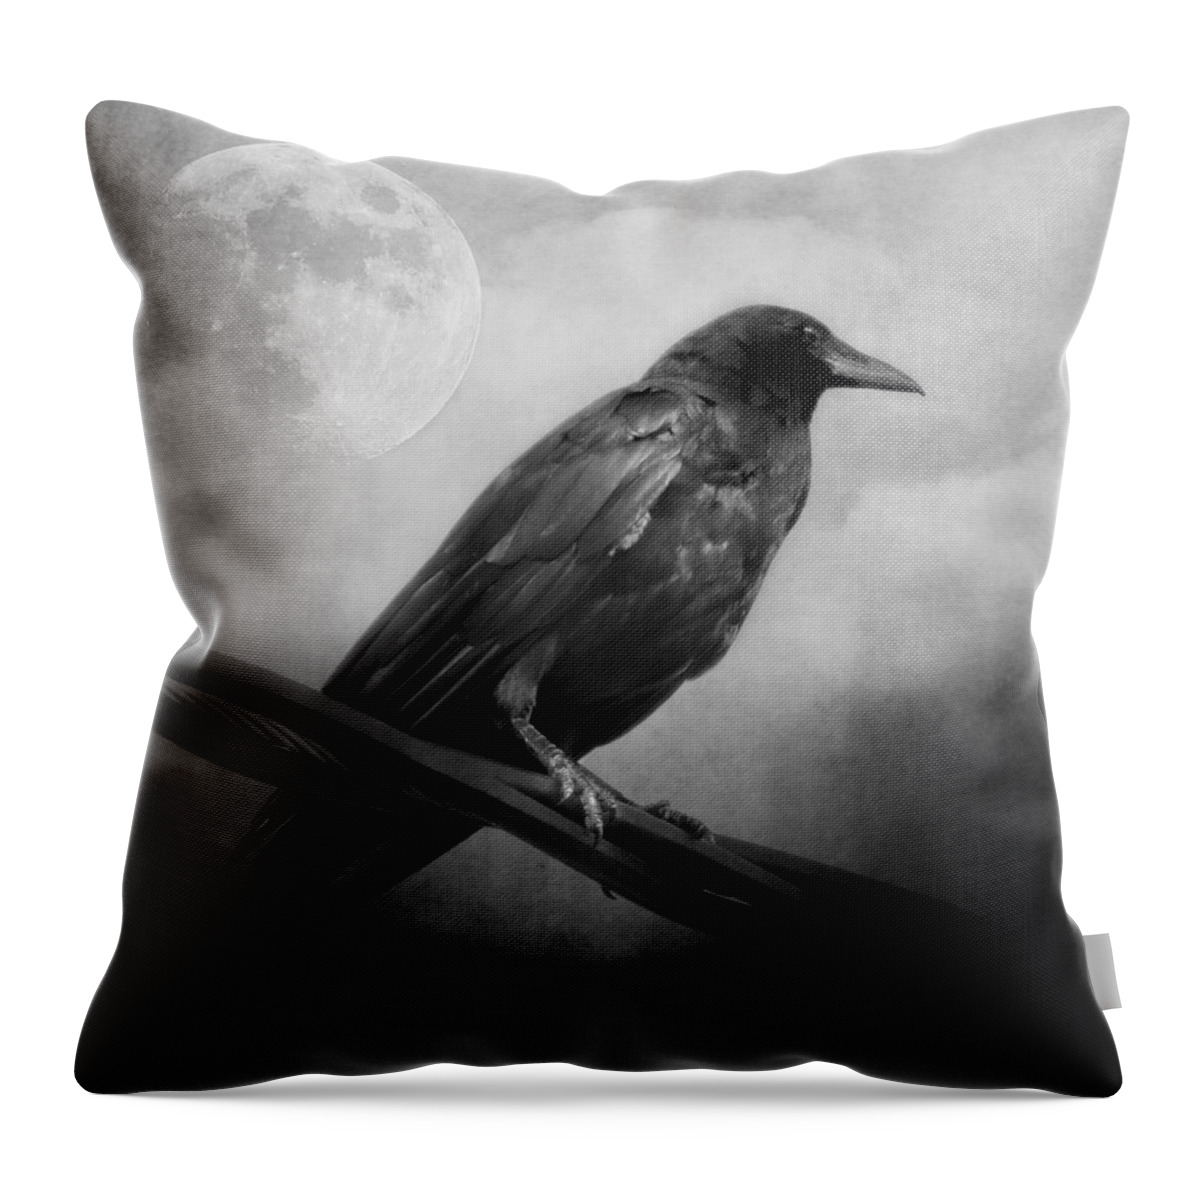 Crow Throw Pillow featuring the photograph Black and White Gothic Crow Raven Art by Melissa Bittinger